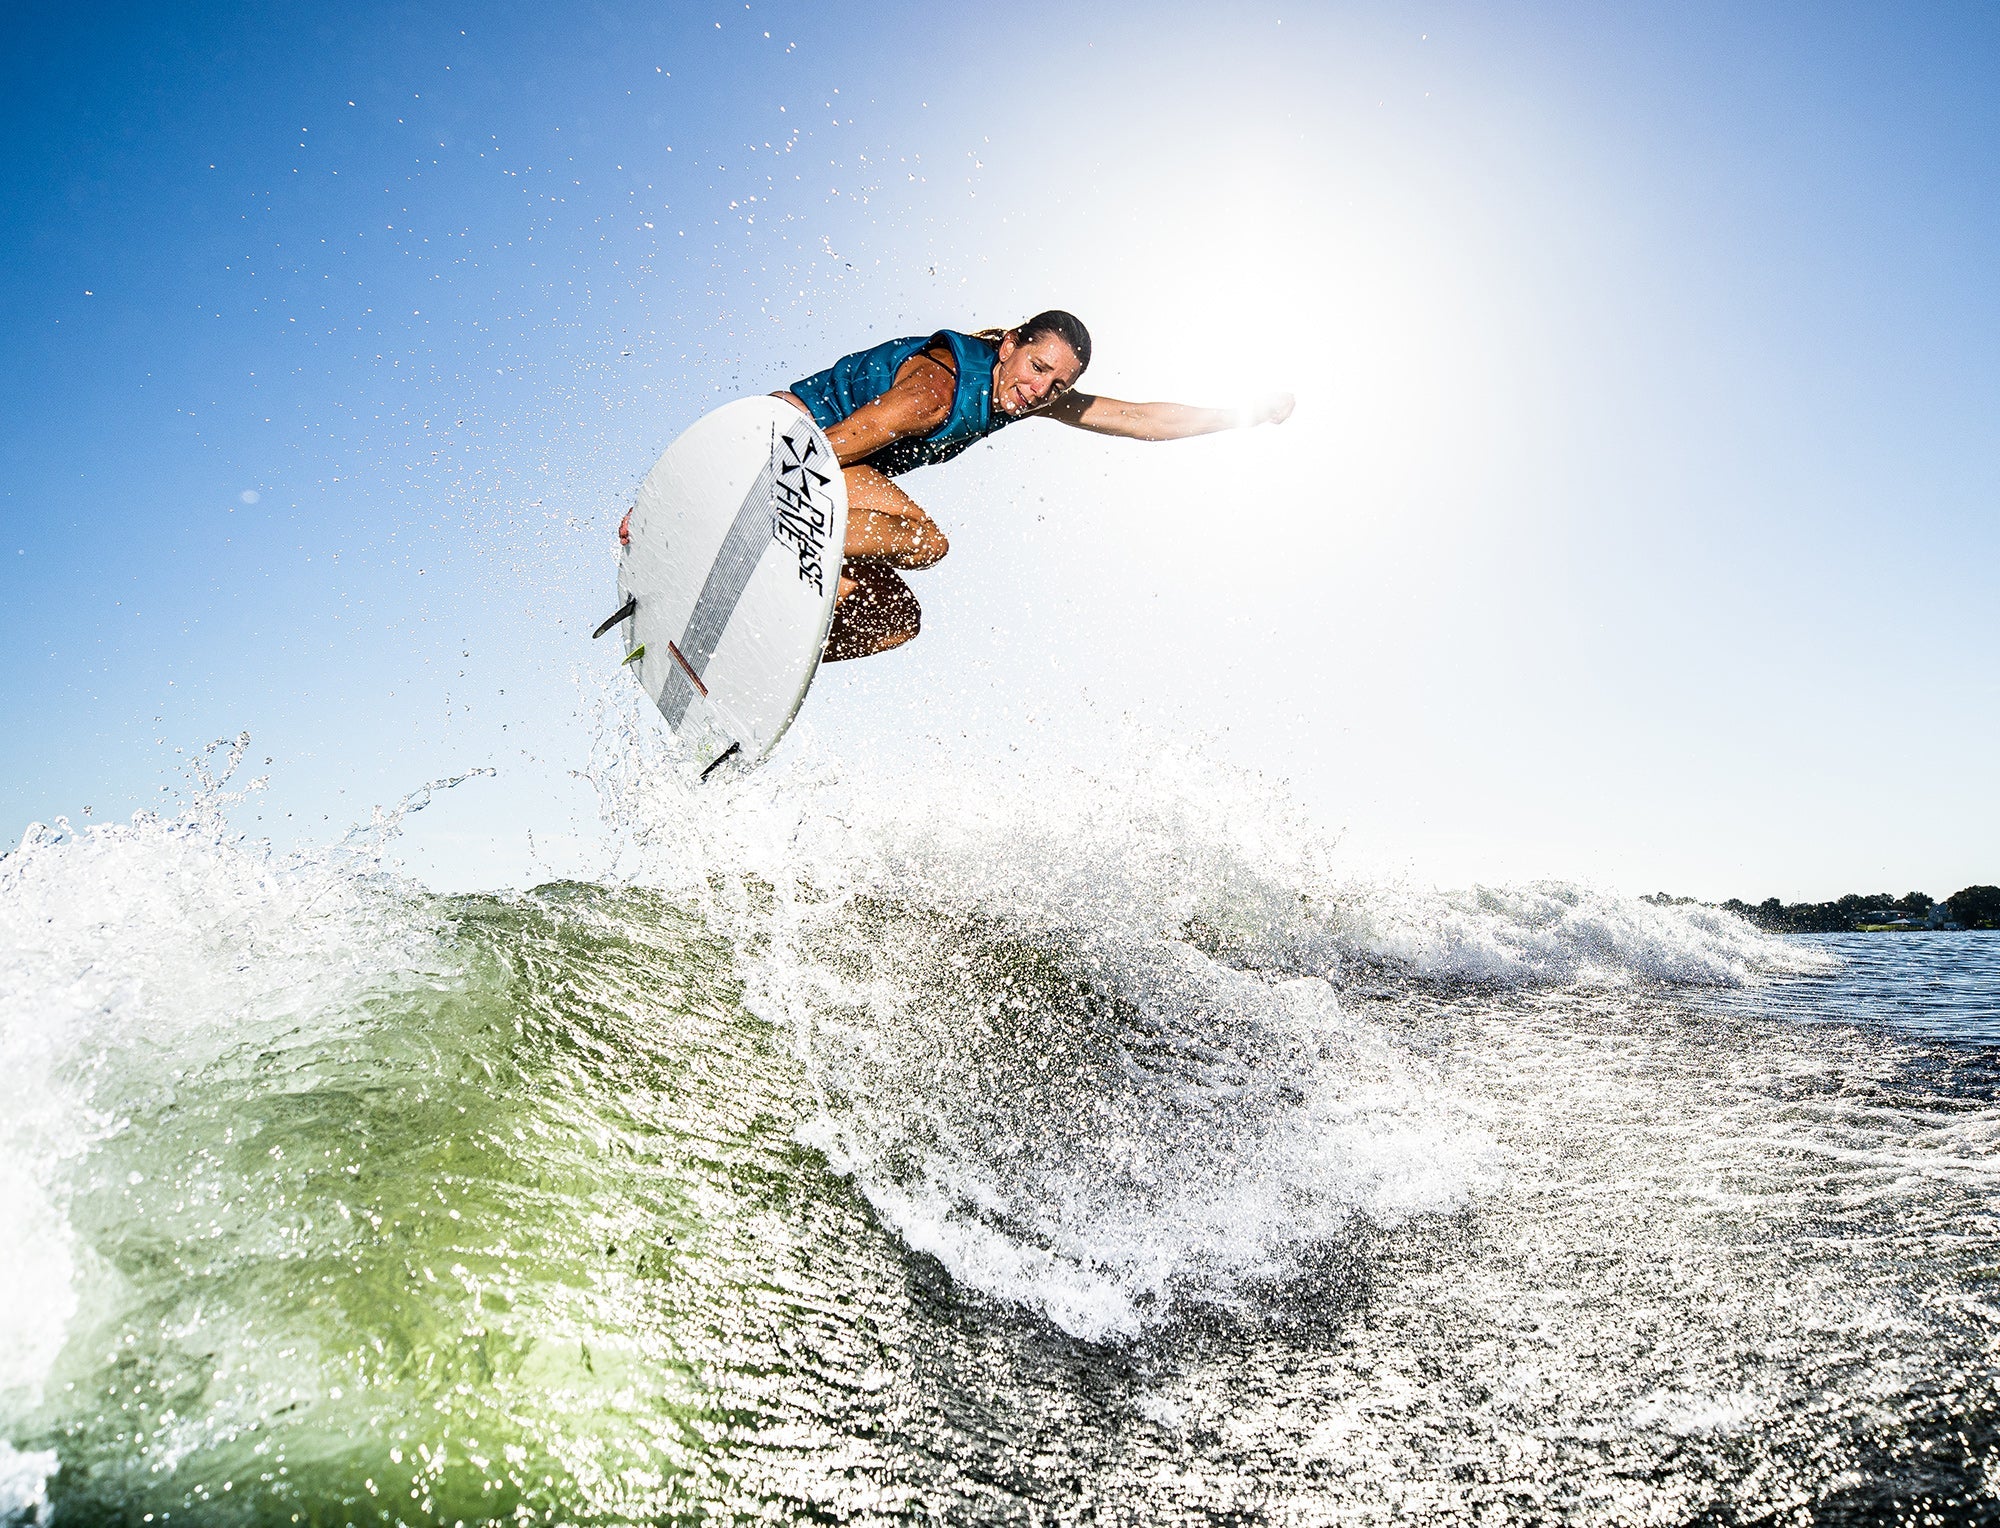 A man is riding a wave on a surfboard, harnessing the power of the Phase 5 2023 Swell Wakesurf Board.